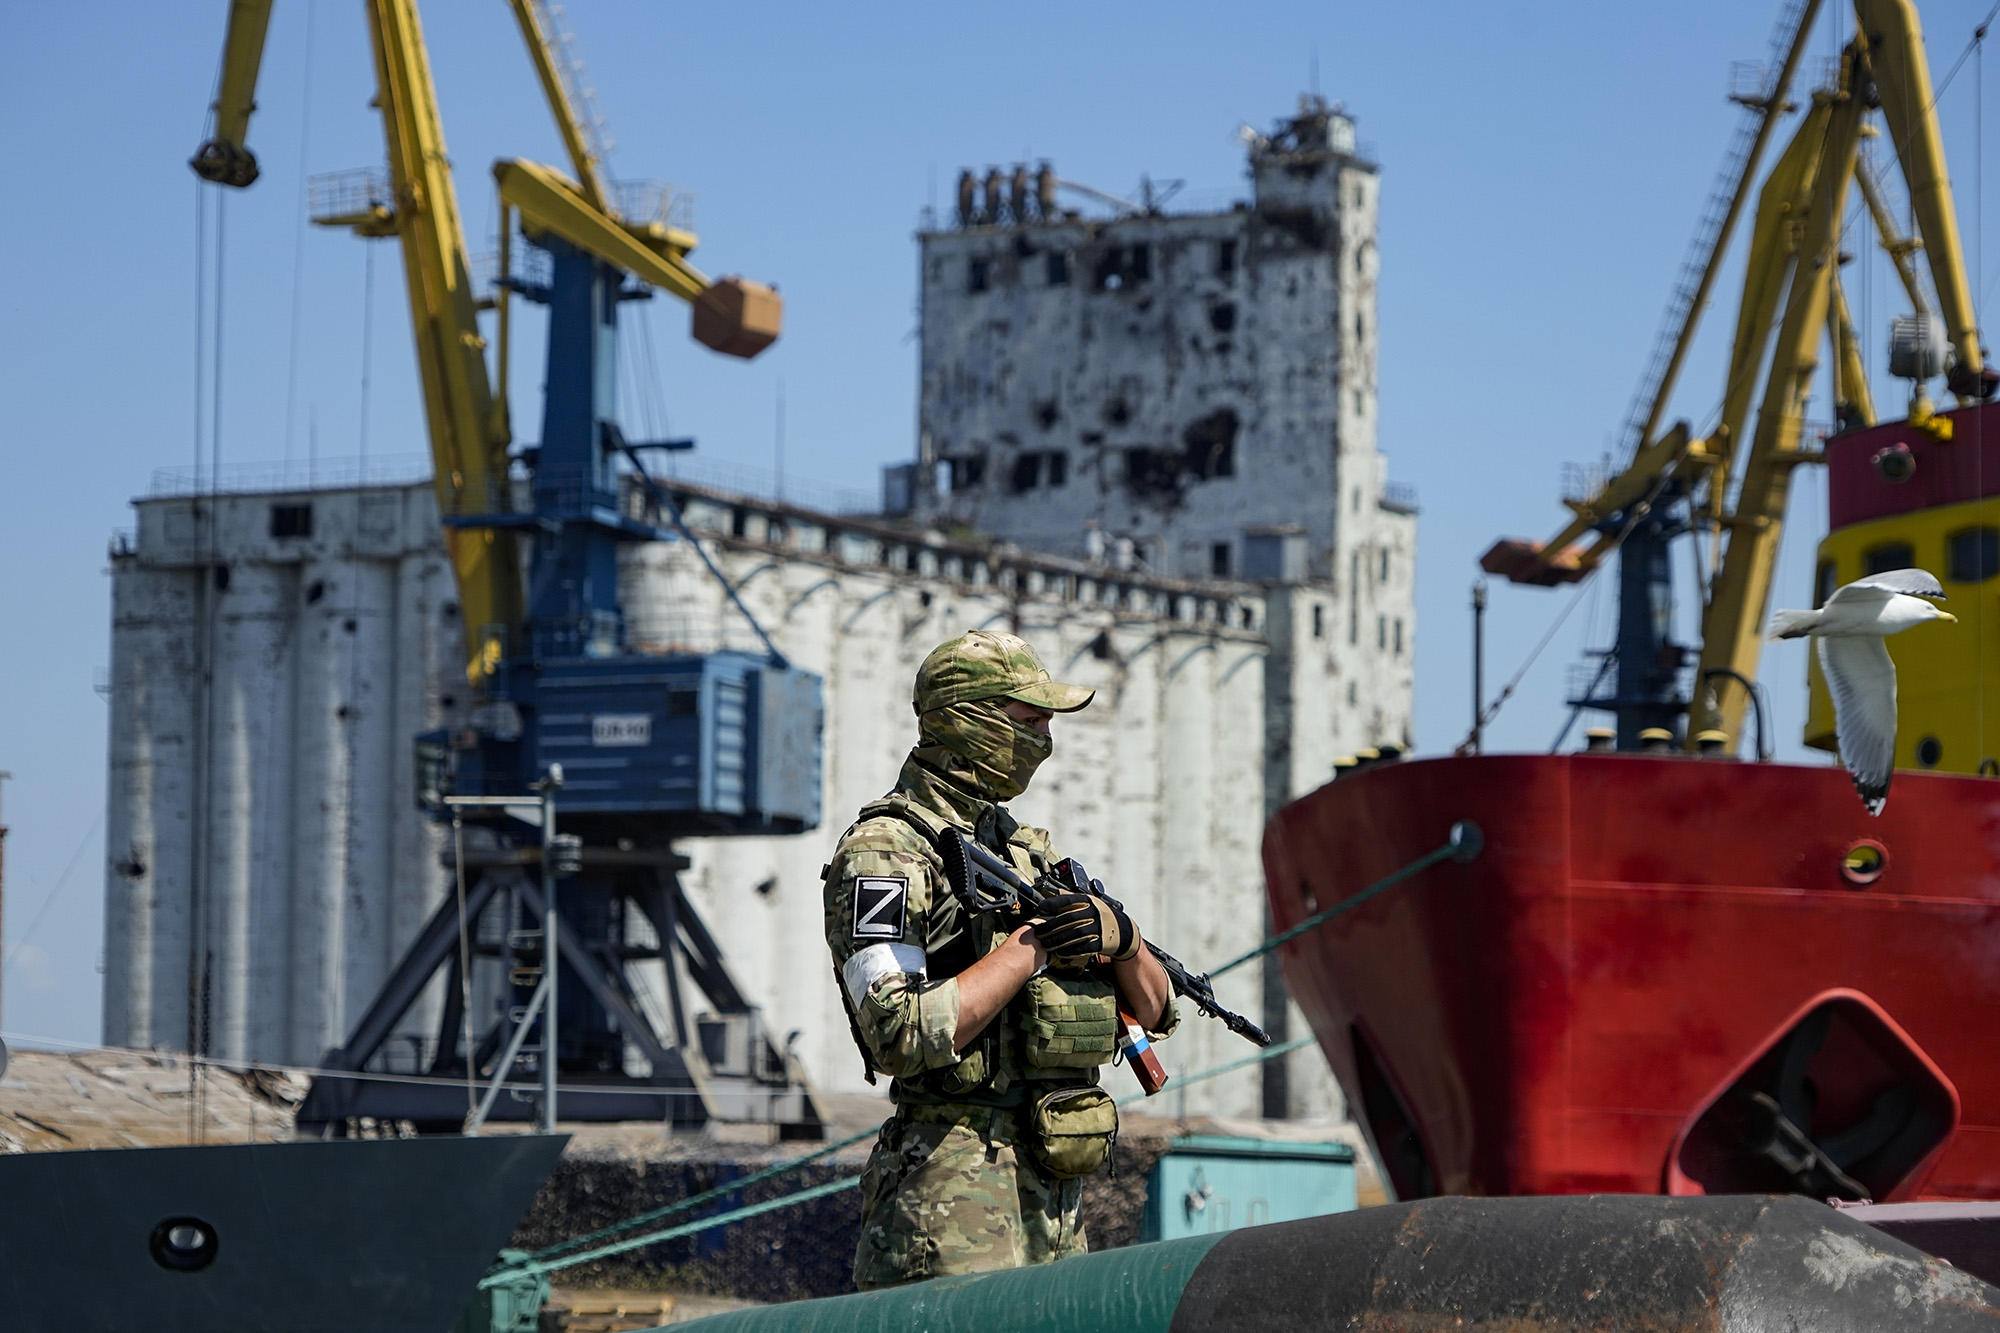 A Russian soldier guards a pier with grain storage in the background at an area of the Mariupol Sea Port, eastern Ukraine, on June 12.